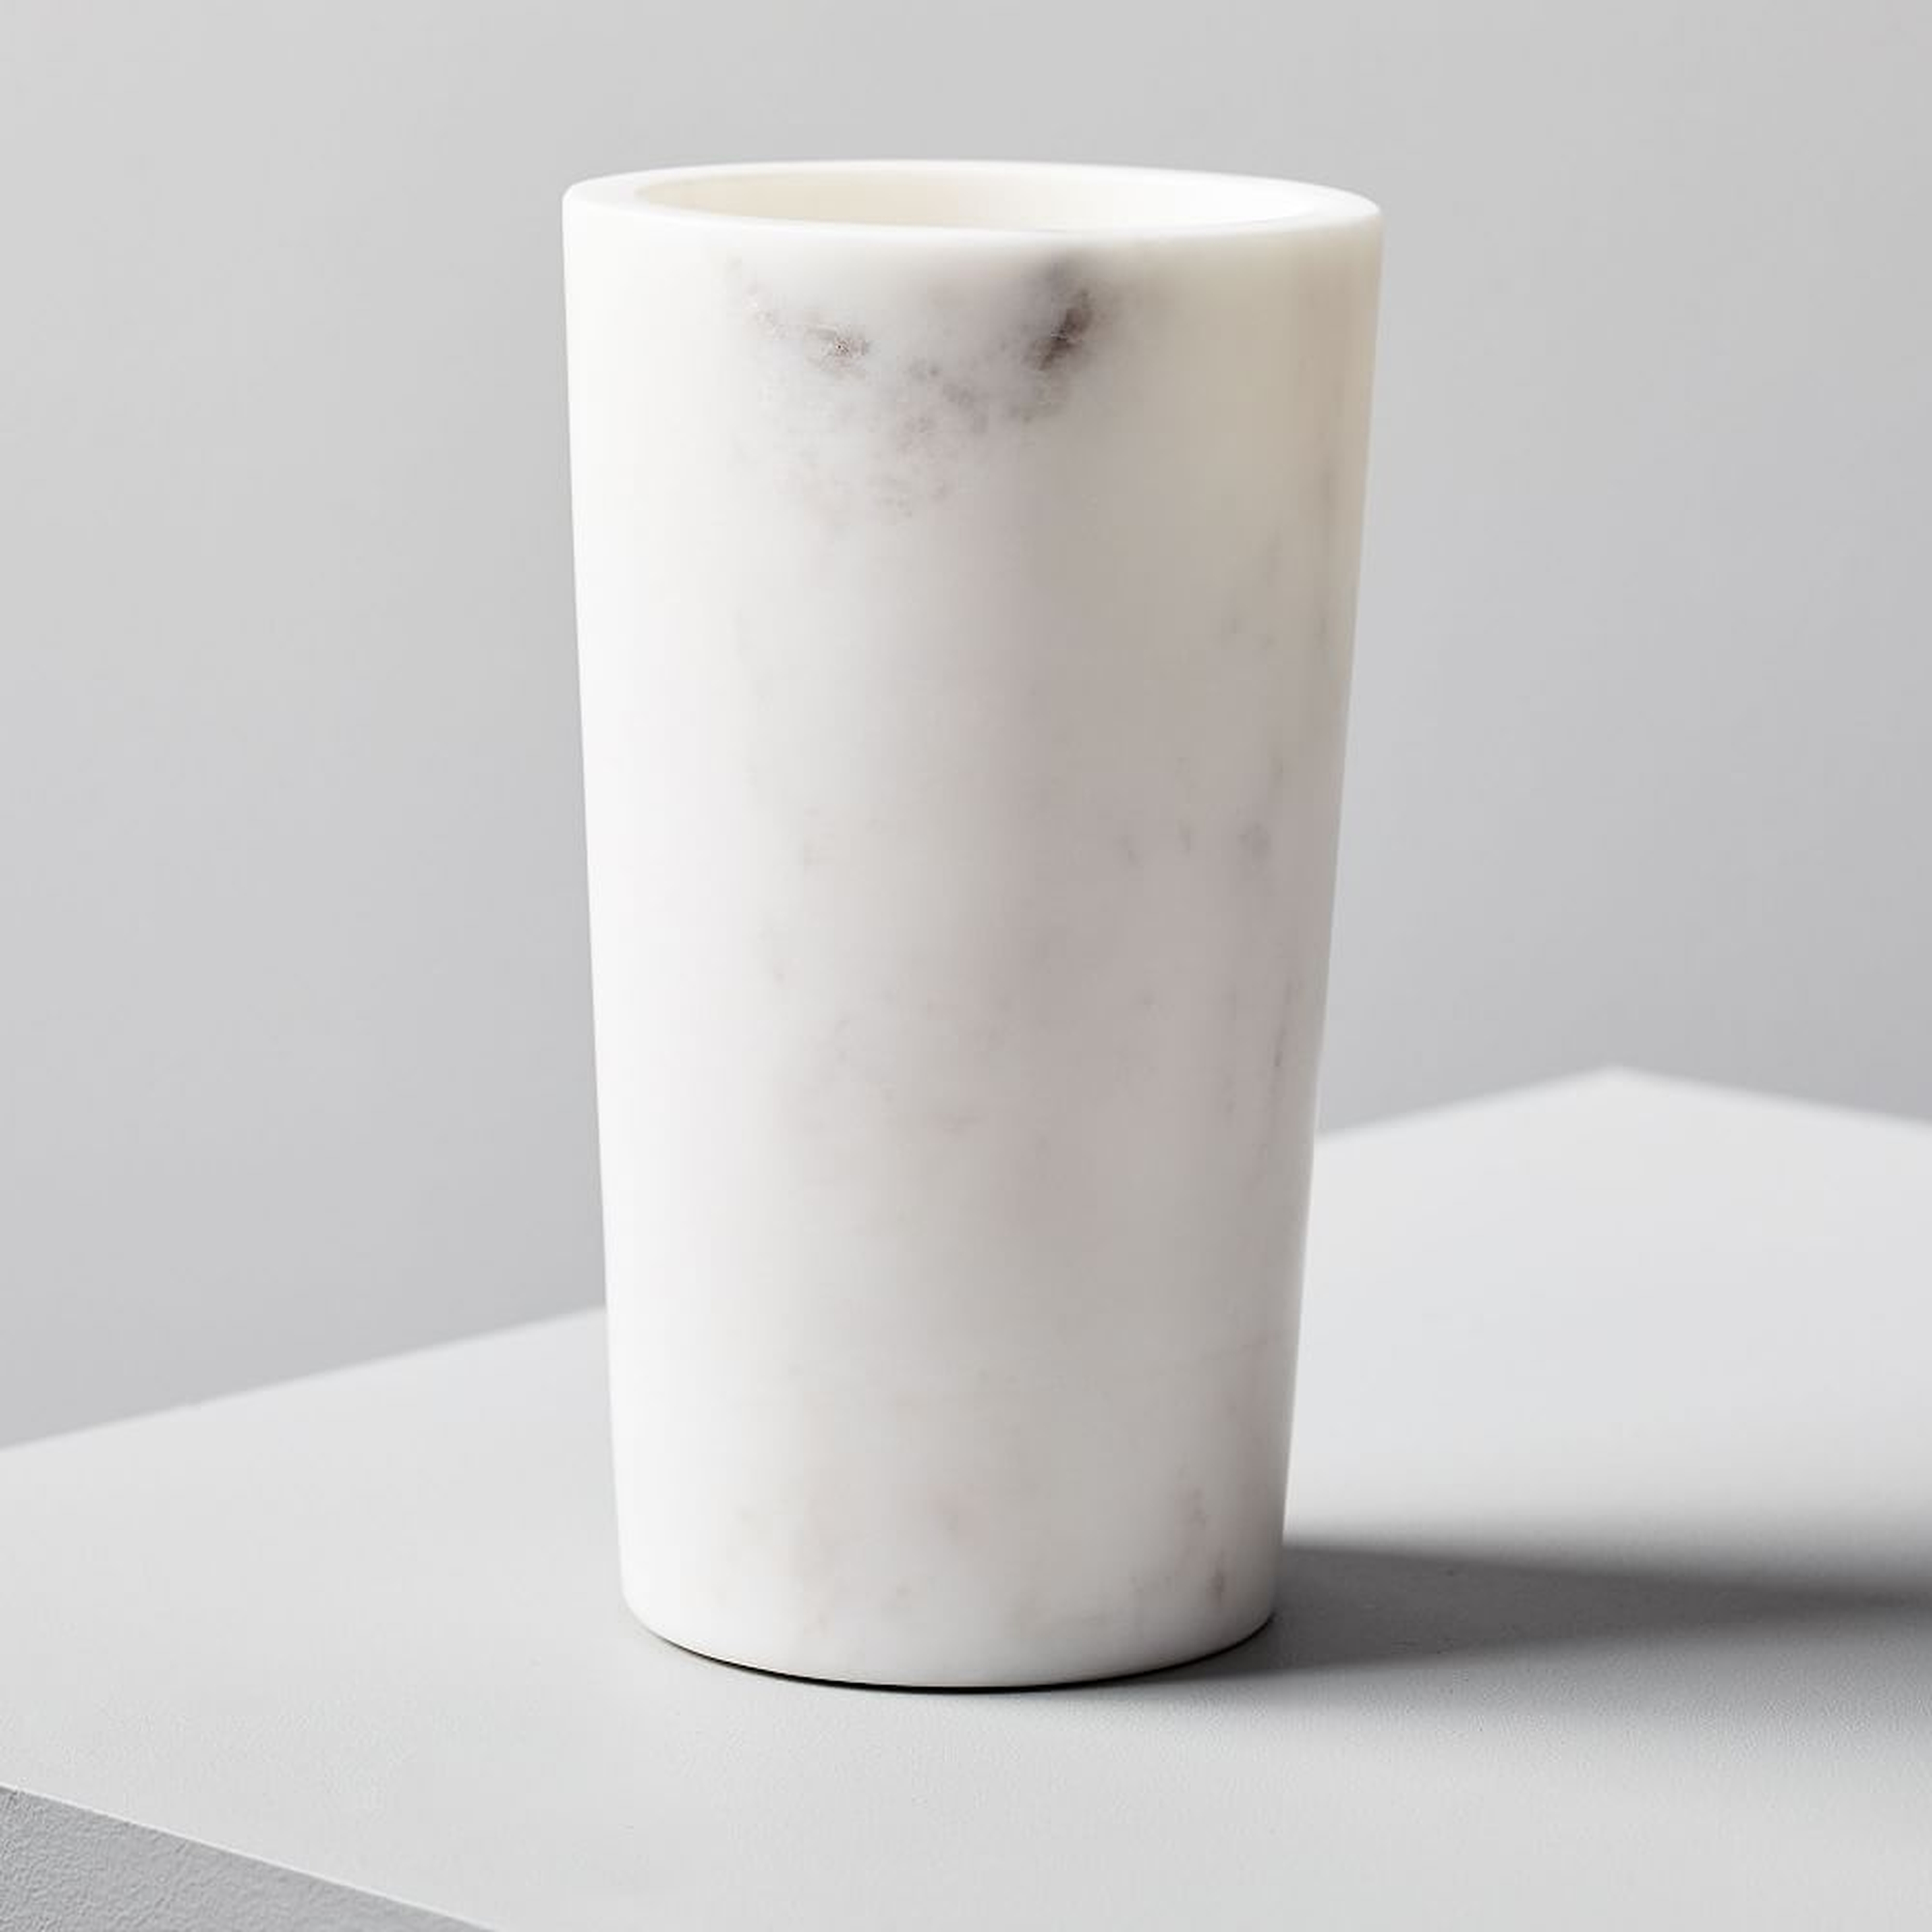 Foundations Marble Tapered Vase, White, 7" - West Elm